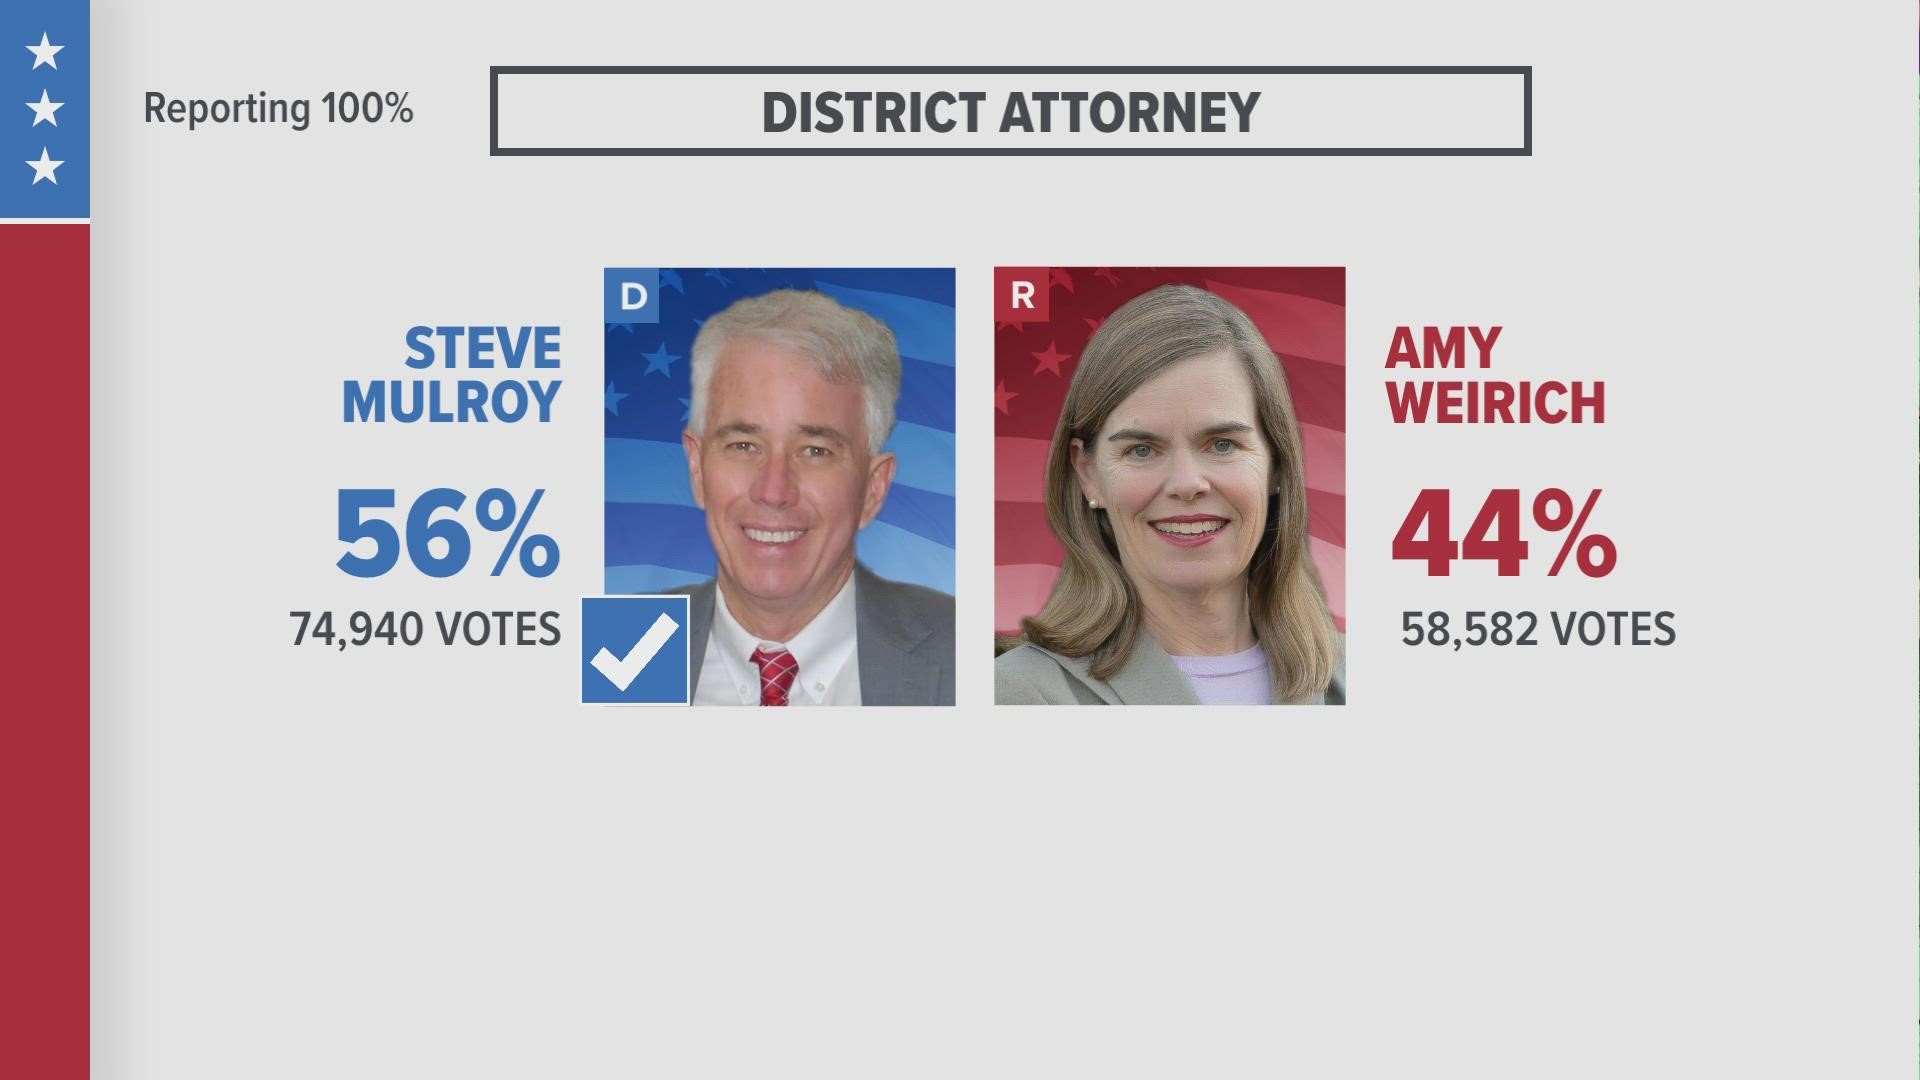 Steve Mulroy scored a decisive win over Shelby County District Attorney Amy Weirich in Thursday's election after a contentious race.